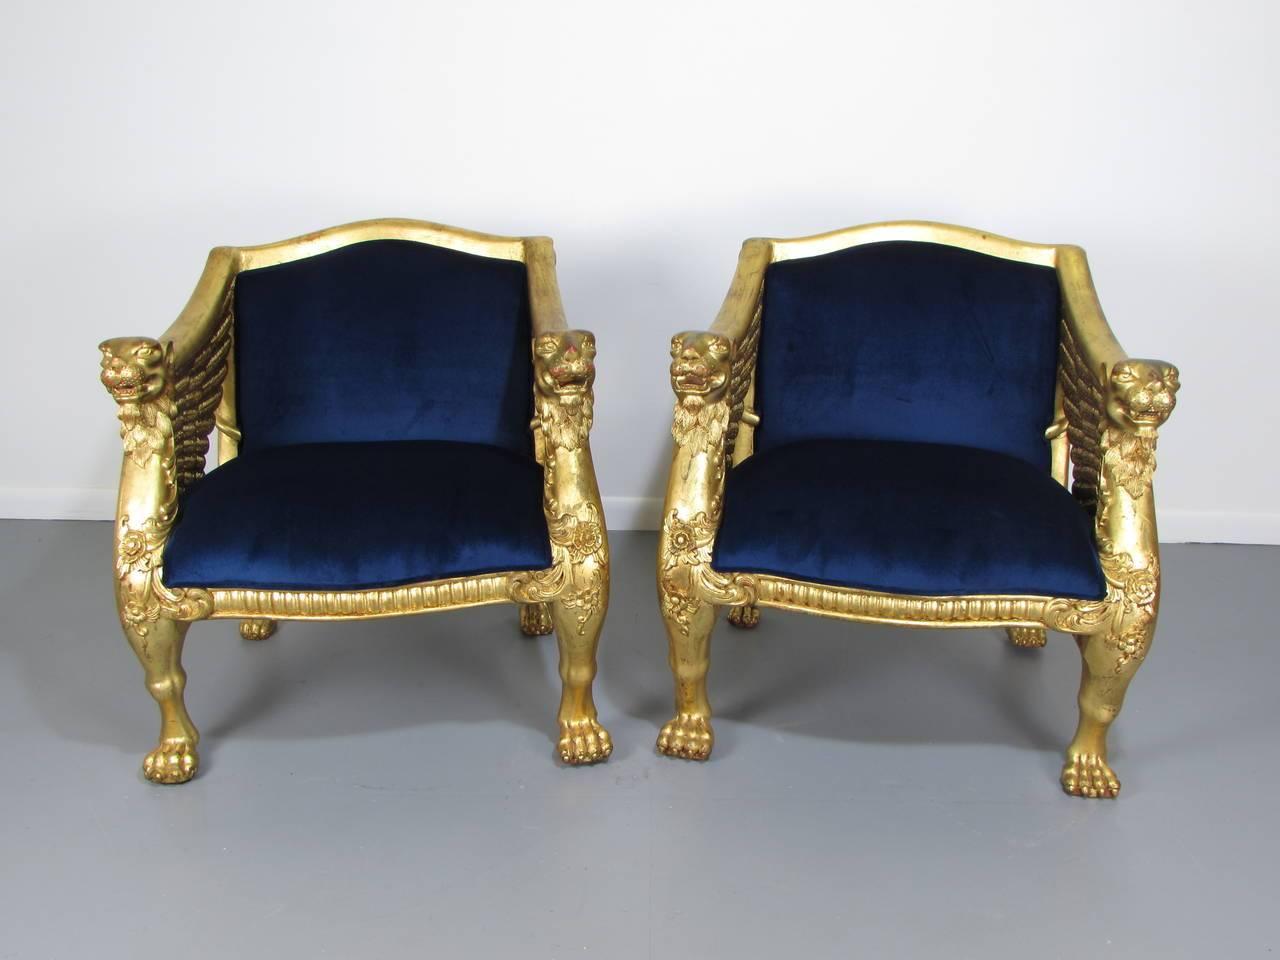 Luxurious and exceptional pair of 19th century French Empire hand-carved winged giltwood bergeres. Incredible detail and workmanship. Newly upholstered in a deep royal blue velvet. Age wear.